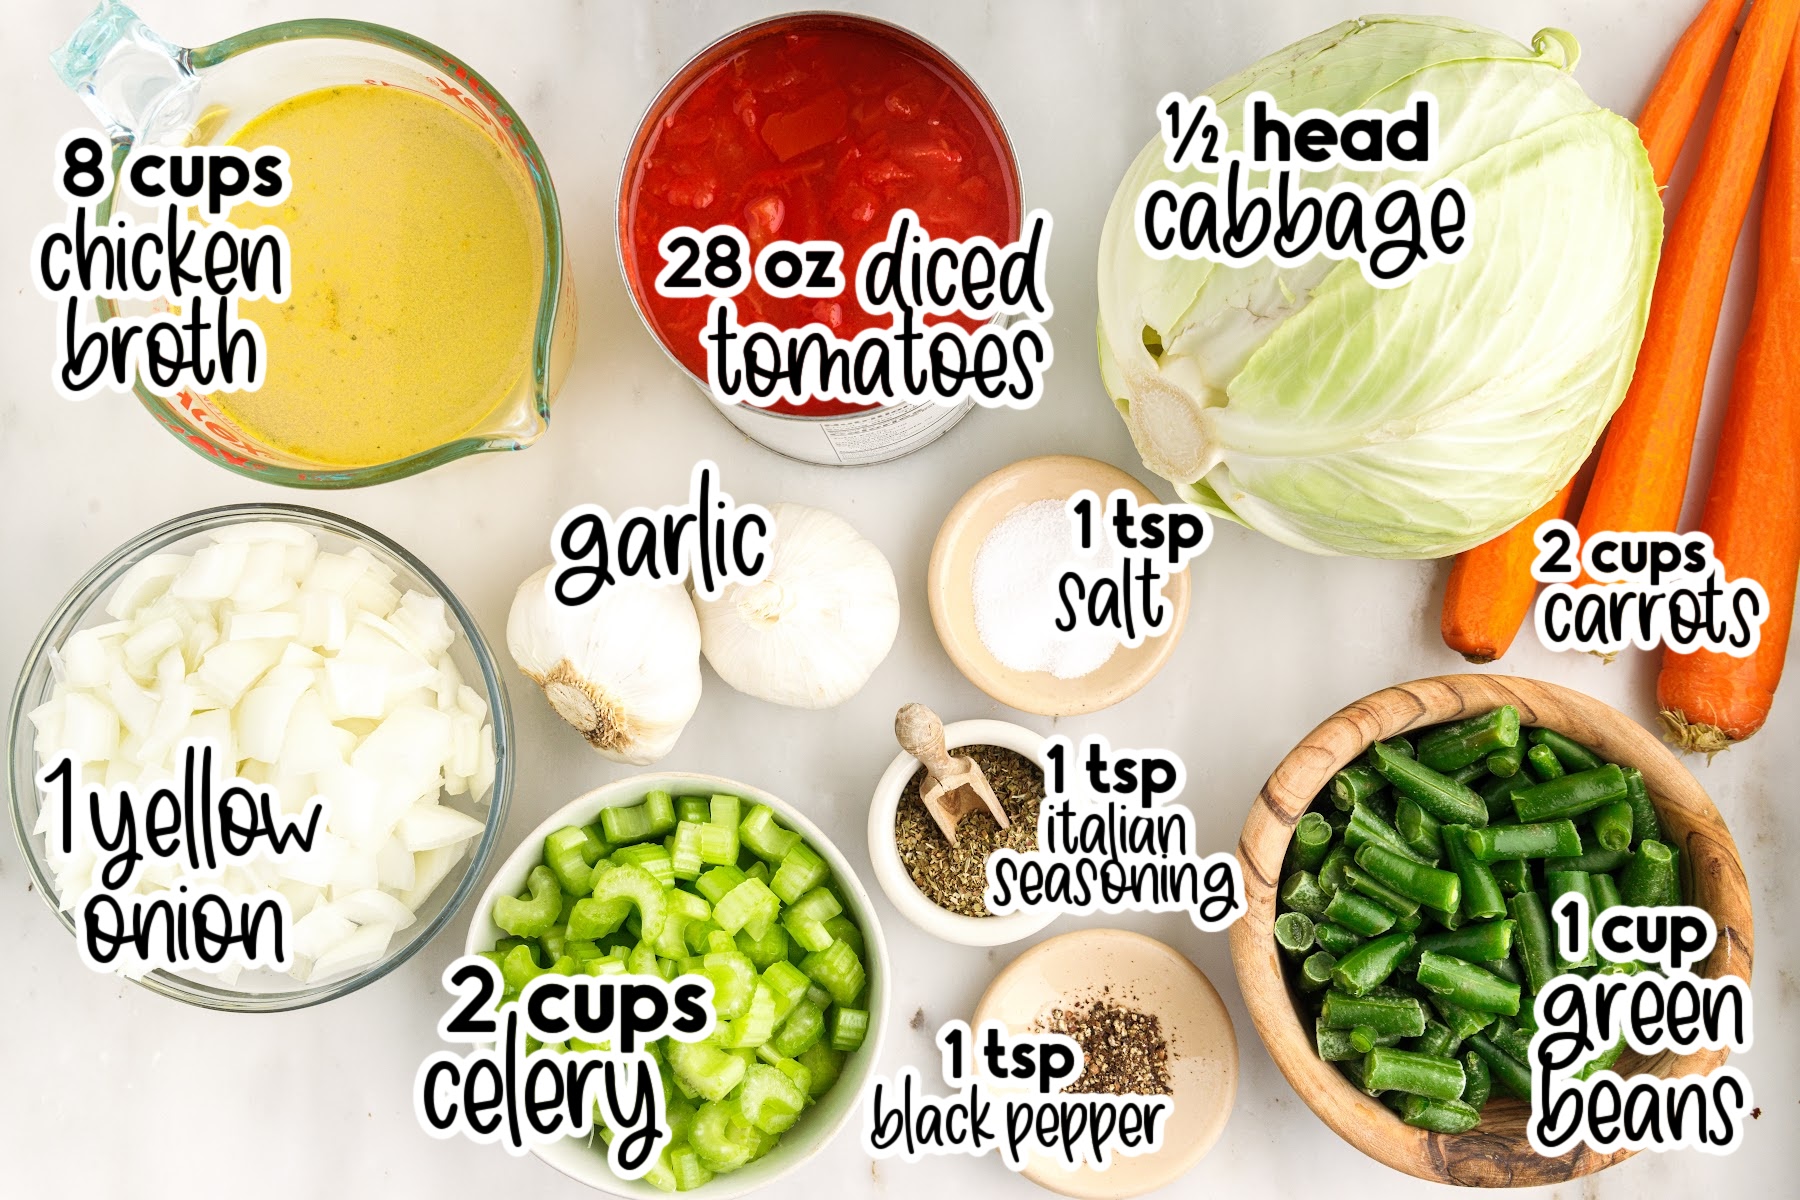 Ingredients needed to make Crockpot Cabbage Soup with text labels.